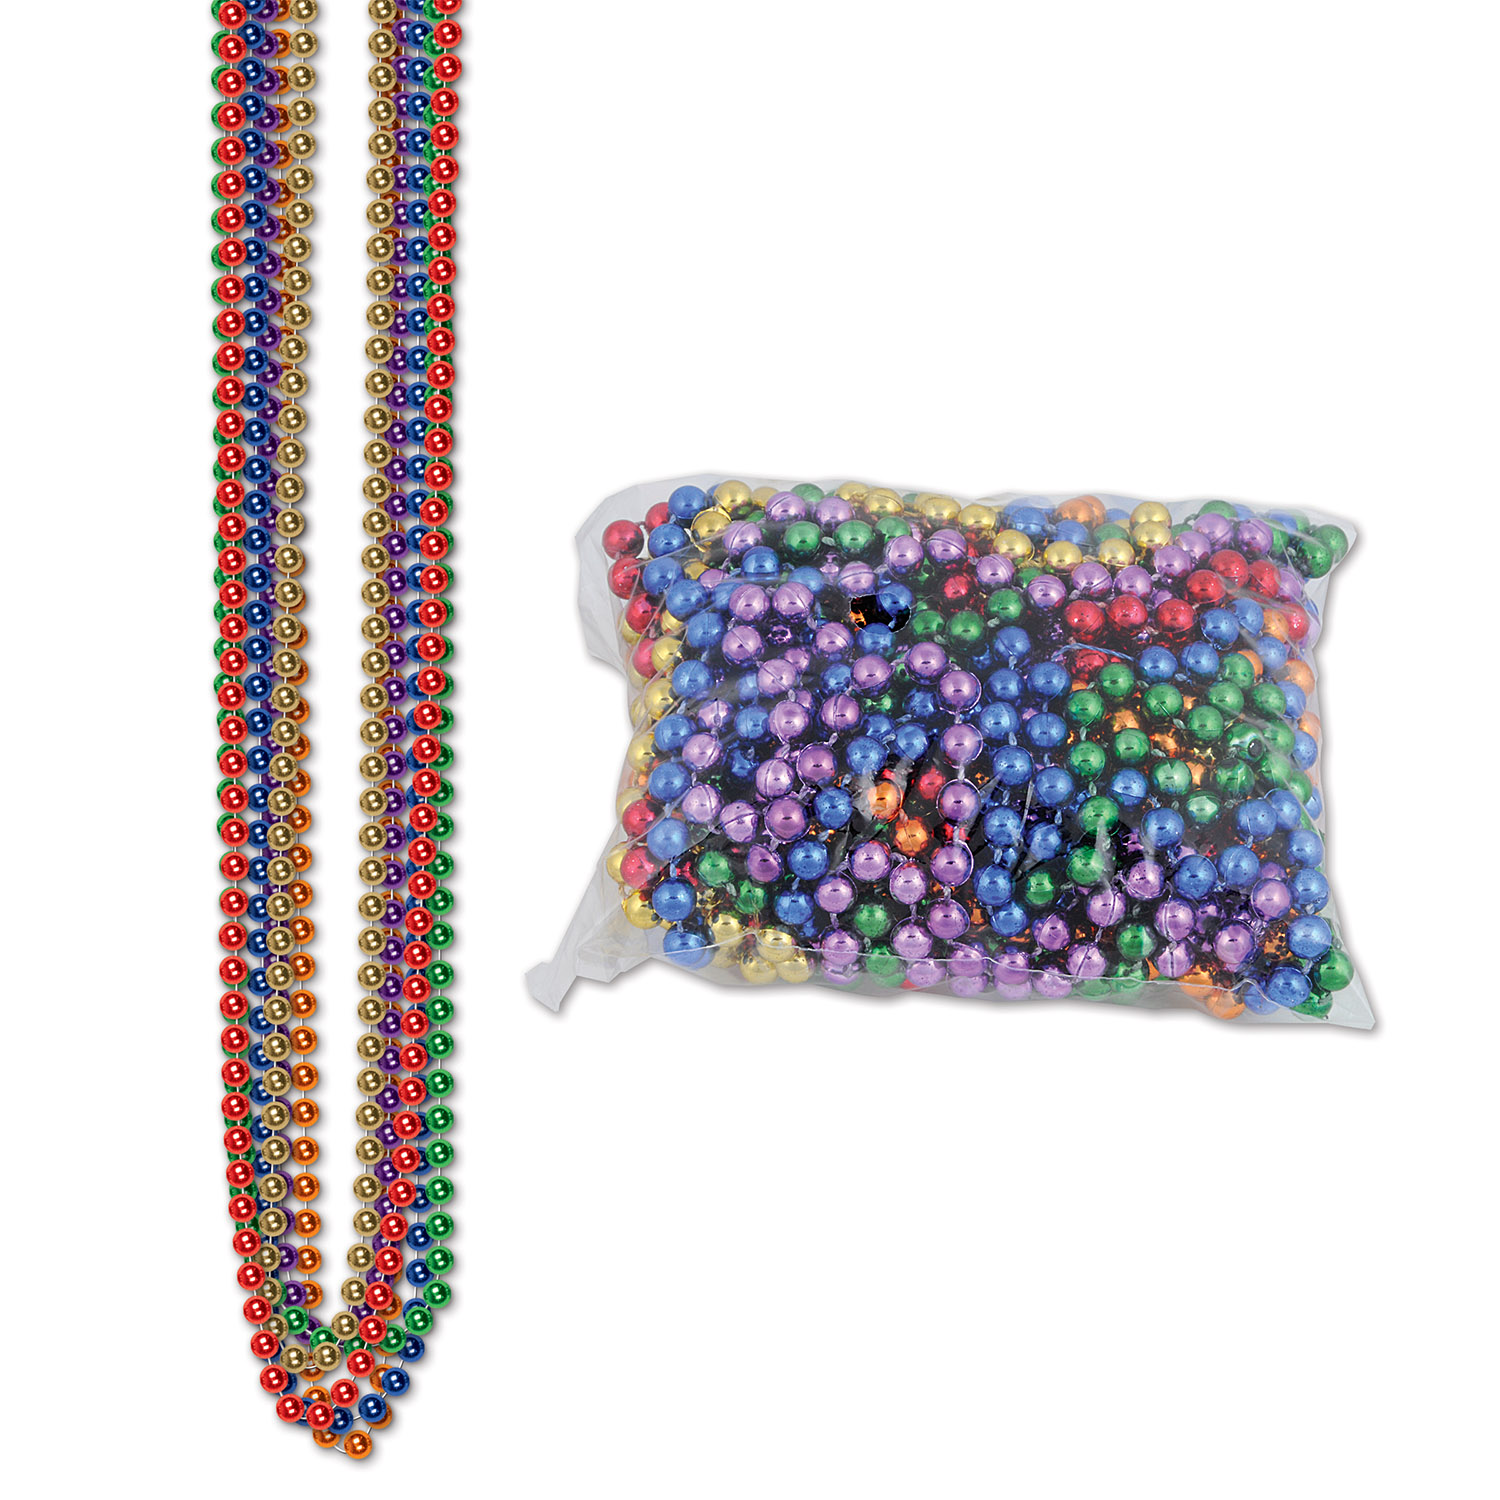 12 Pieces of Party Beads - Small Round